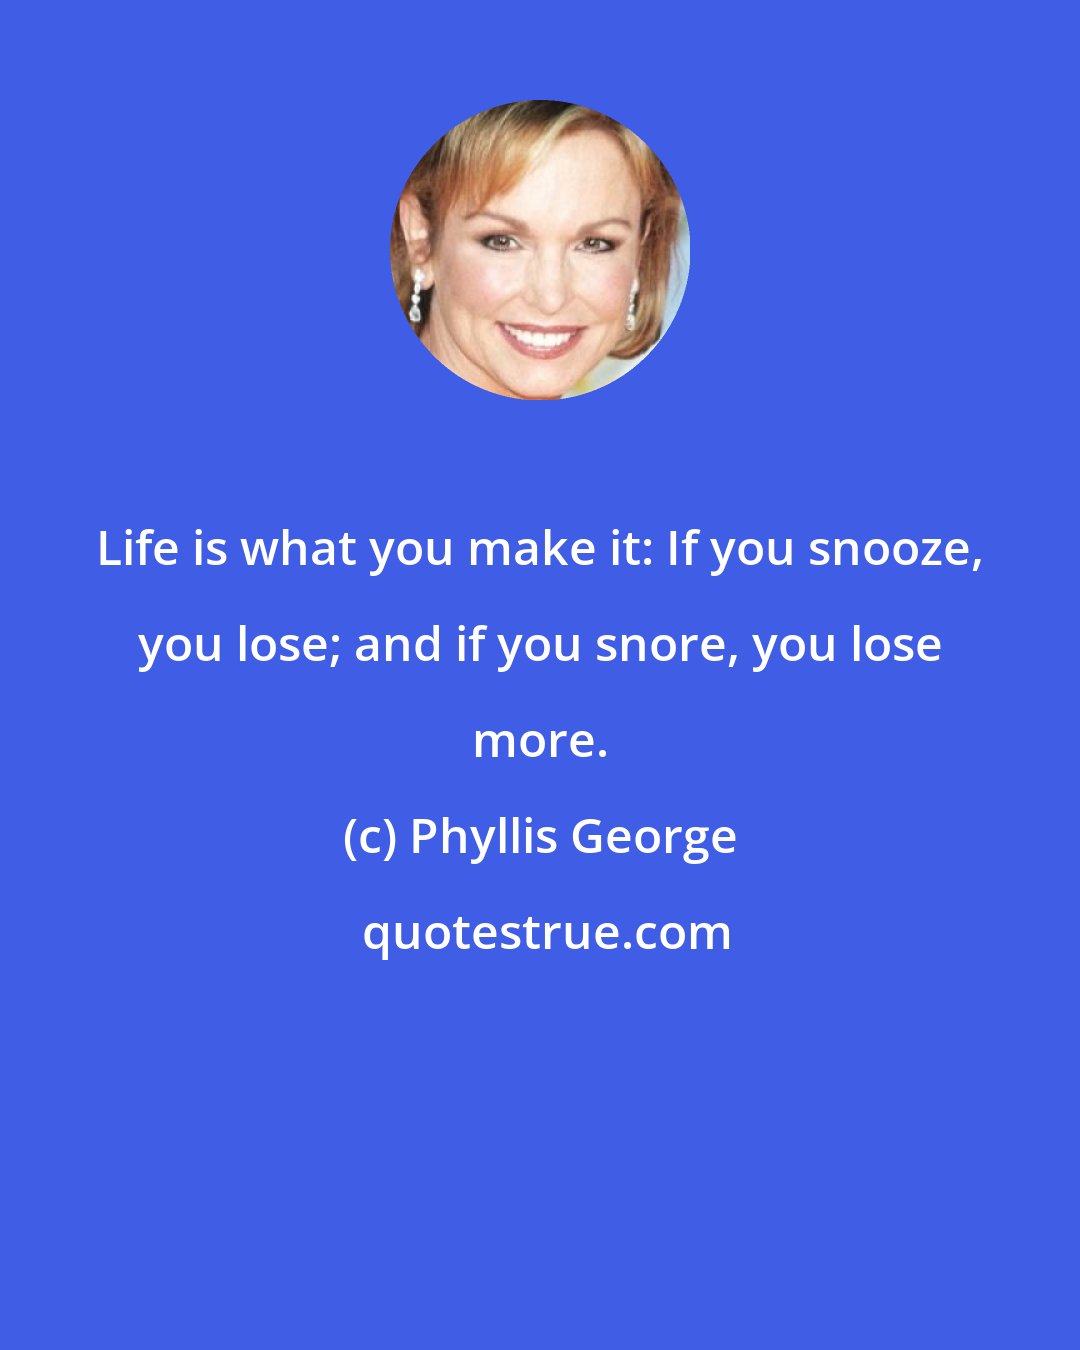 Phyllis George: Life is what you make it: If you snooze, you lose; and if you snore, you lose more.